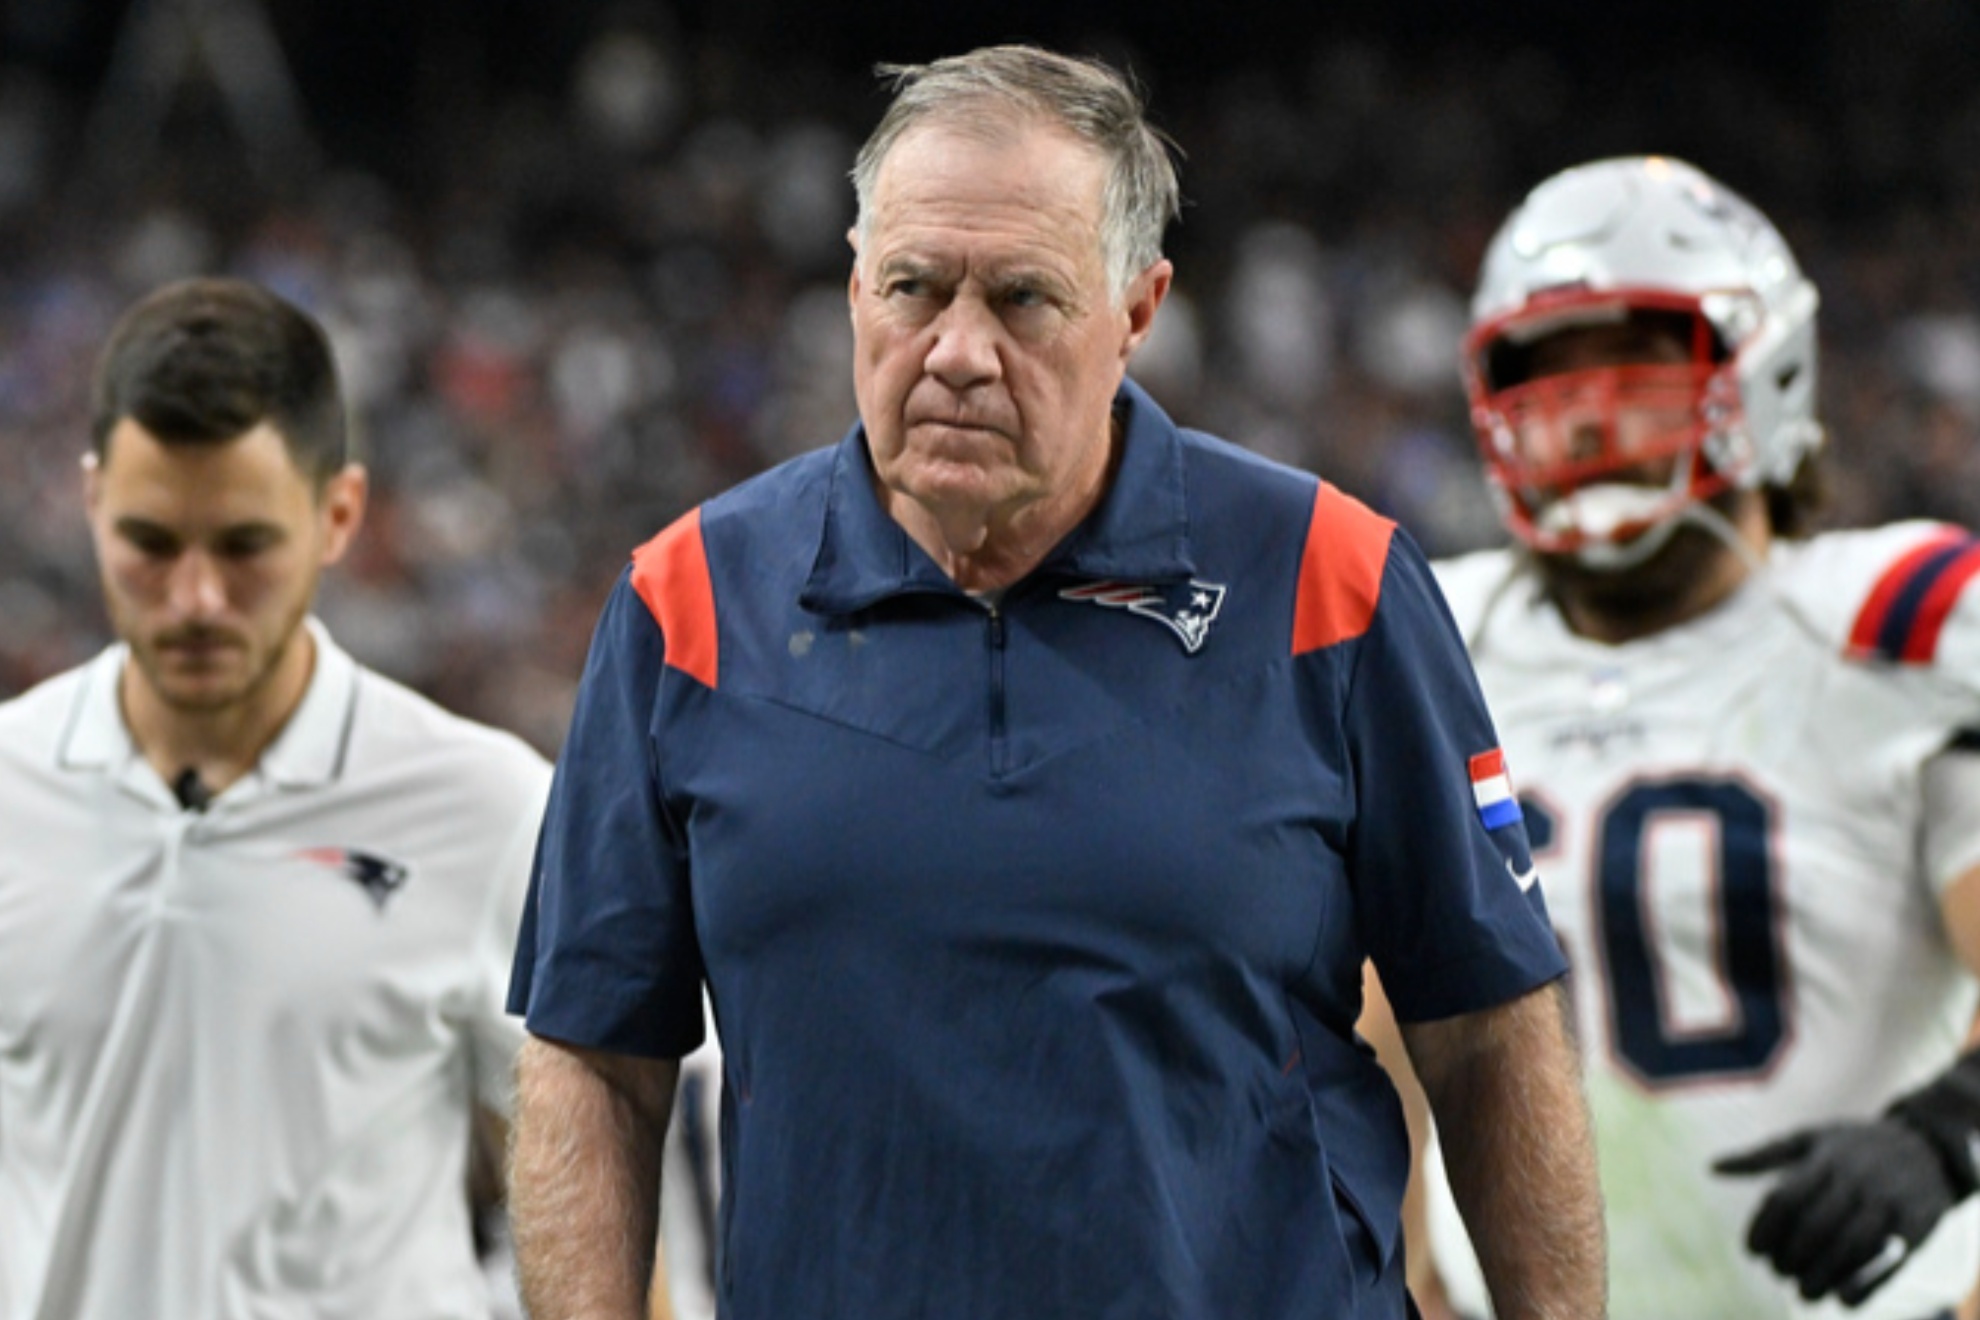 Patriots head coach, Bill Belichick, took out his frustrations on a tablet during Sunday's loss to the Raiders